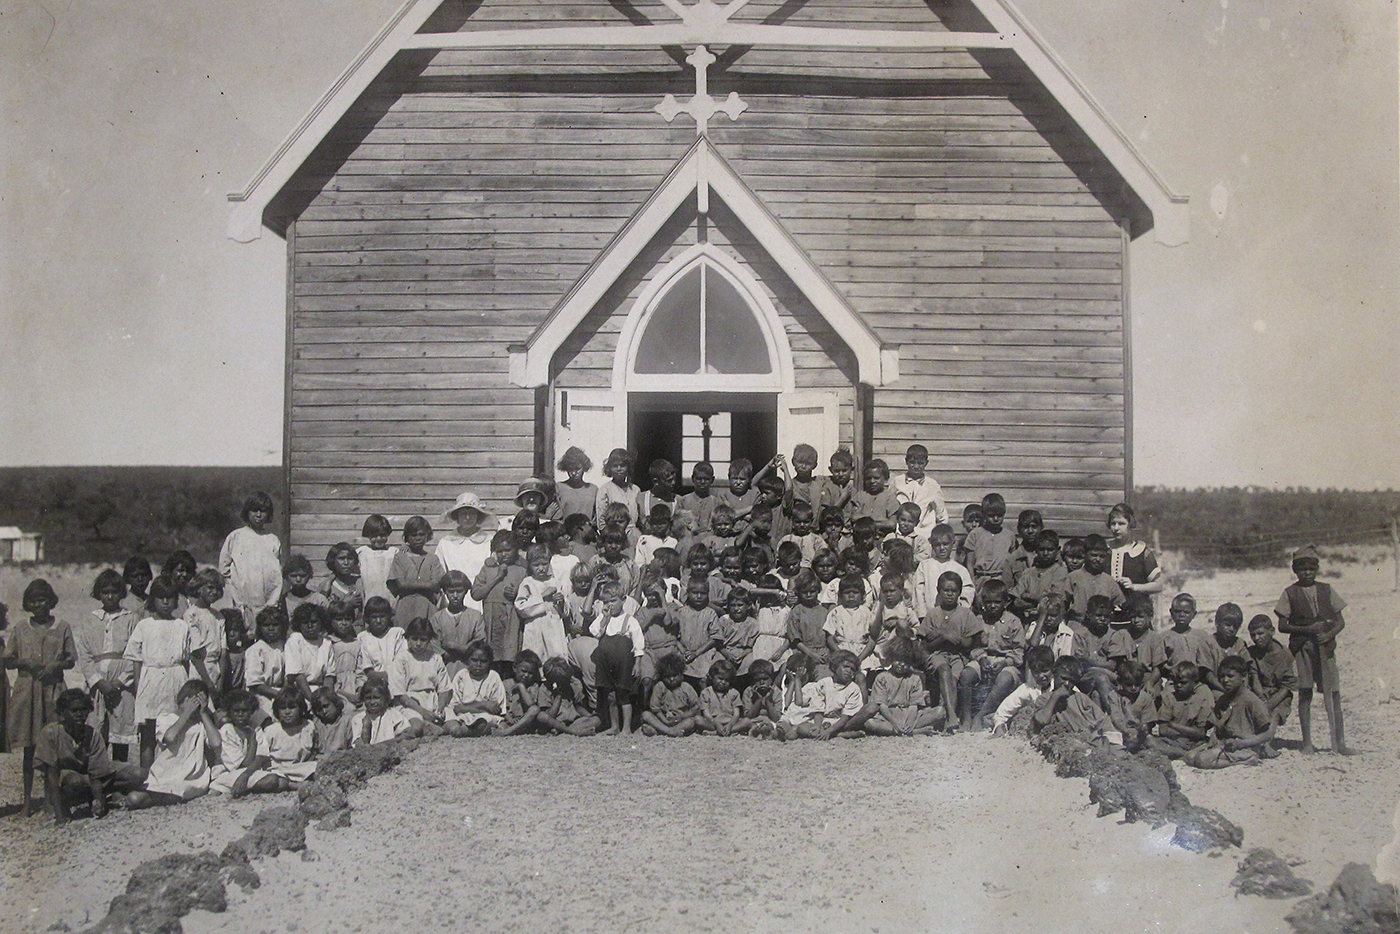 Aboriginal children at Moore River Settlement Church, courtesy of the AHWA collection.